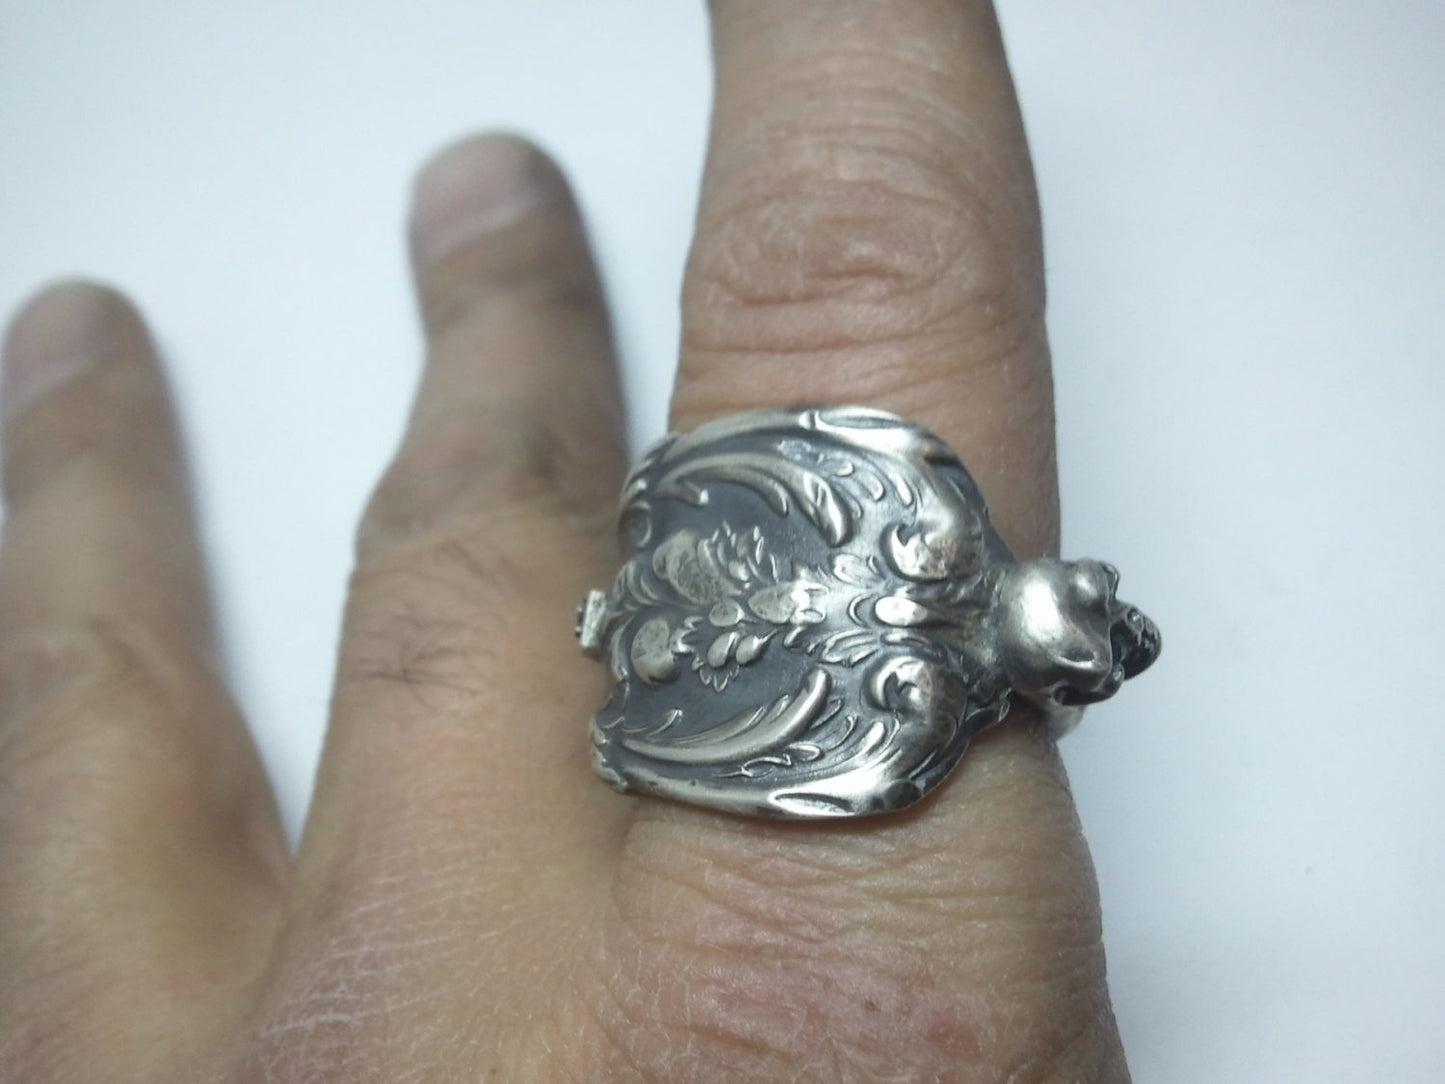 Antique Victorian Spoon Ring With skull accent 925 Sterling Silver Ring. Size 11.5 US Custom Made to Order in USA.